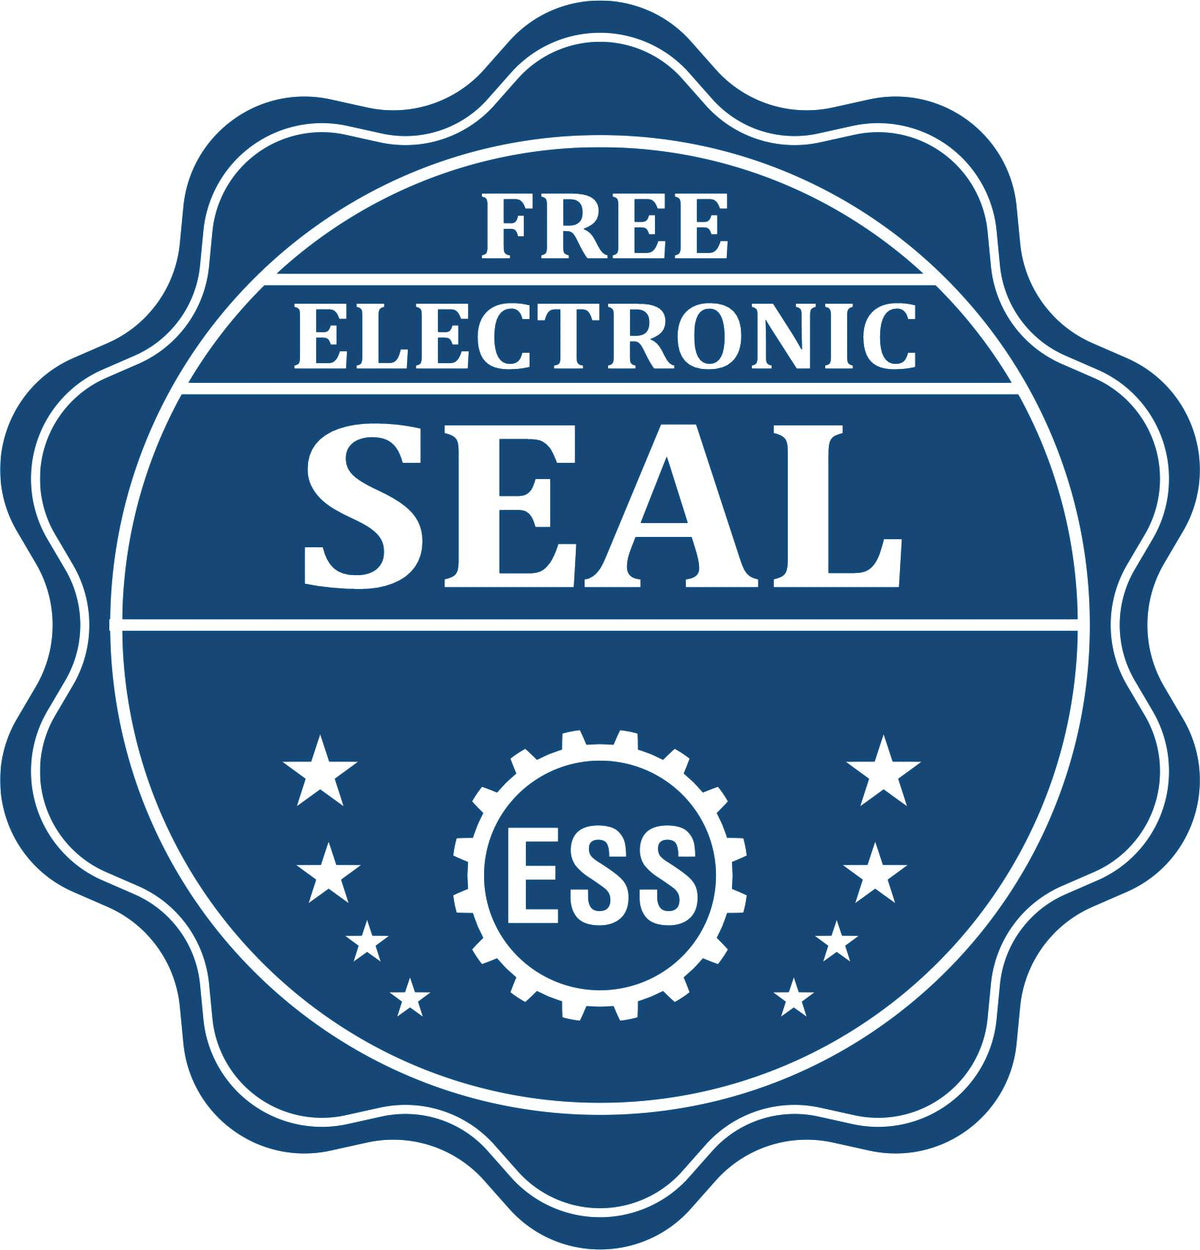 A badge showing a free electronic seal for the Hybrid Nebraska Architect Seal with stars and the ESS gear on the emblem.